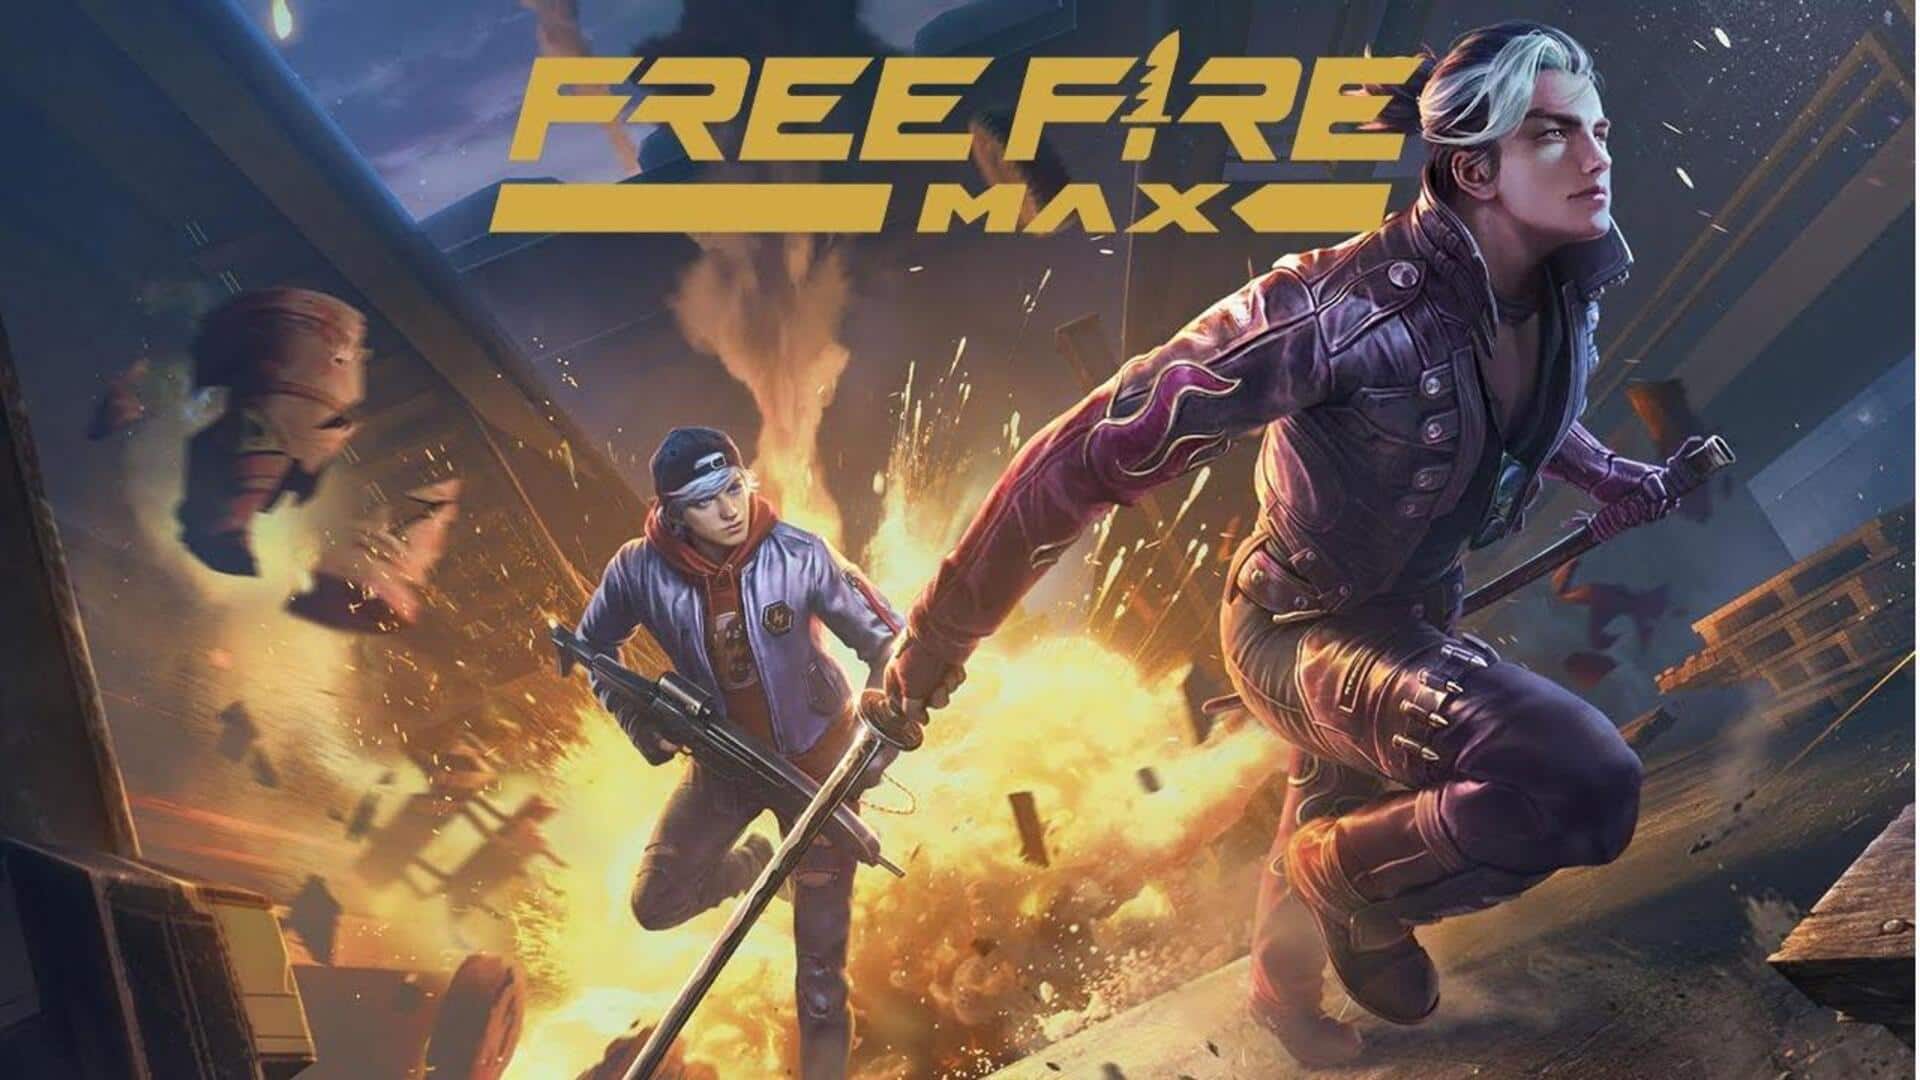 Garena Free Fire MAX's July 14 codes: How to redeem